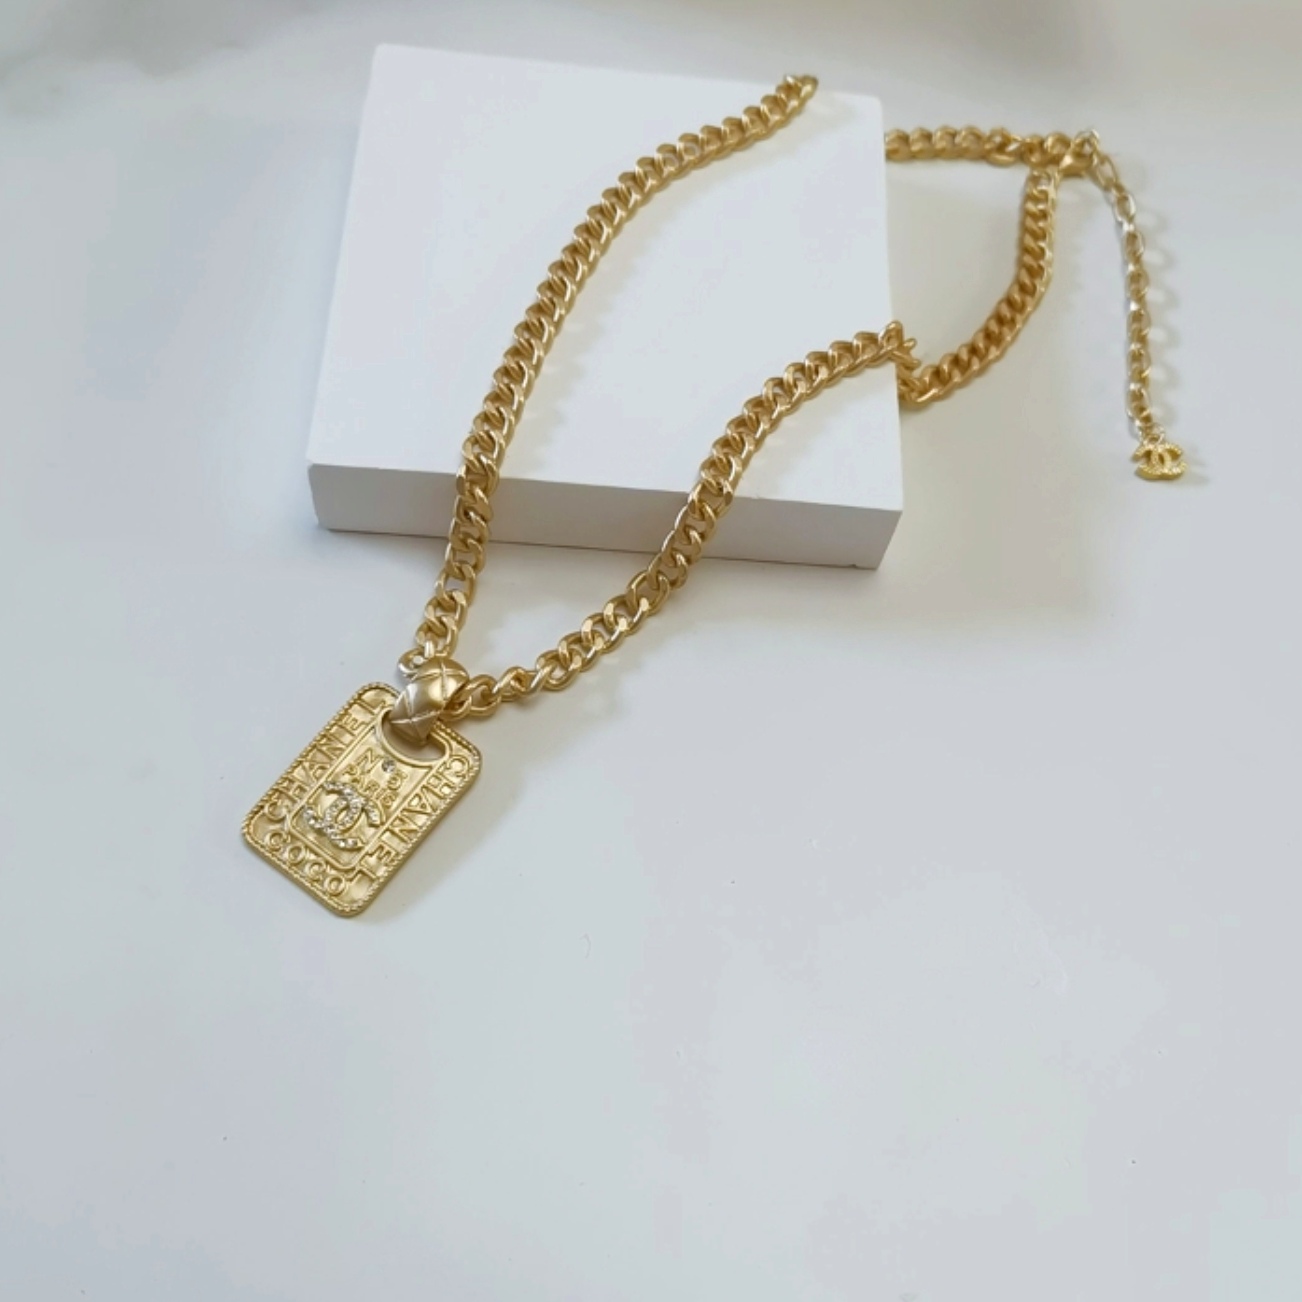 Chanel necklace 107637